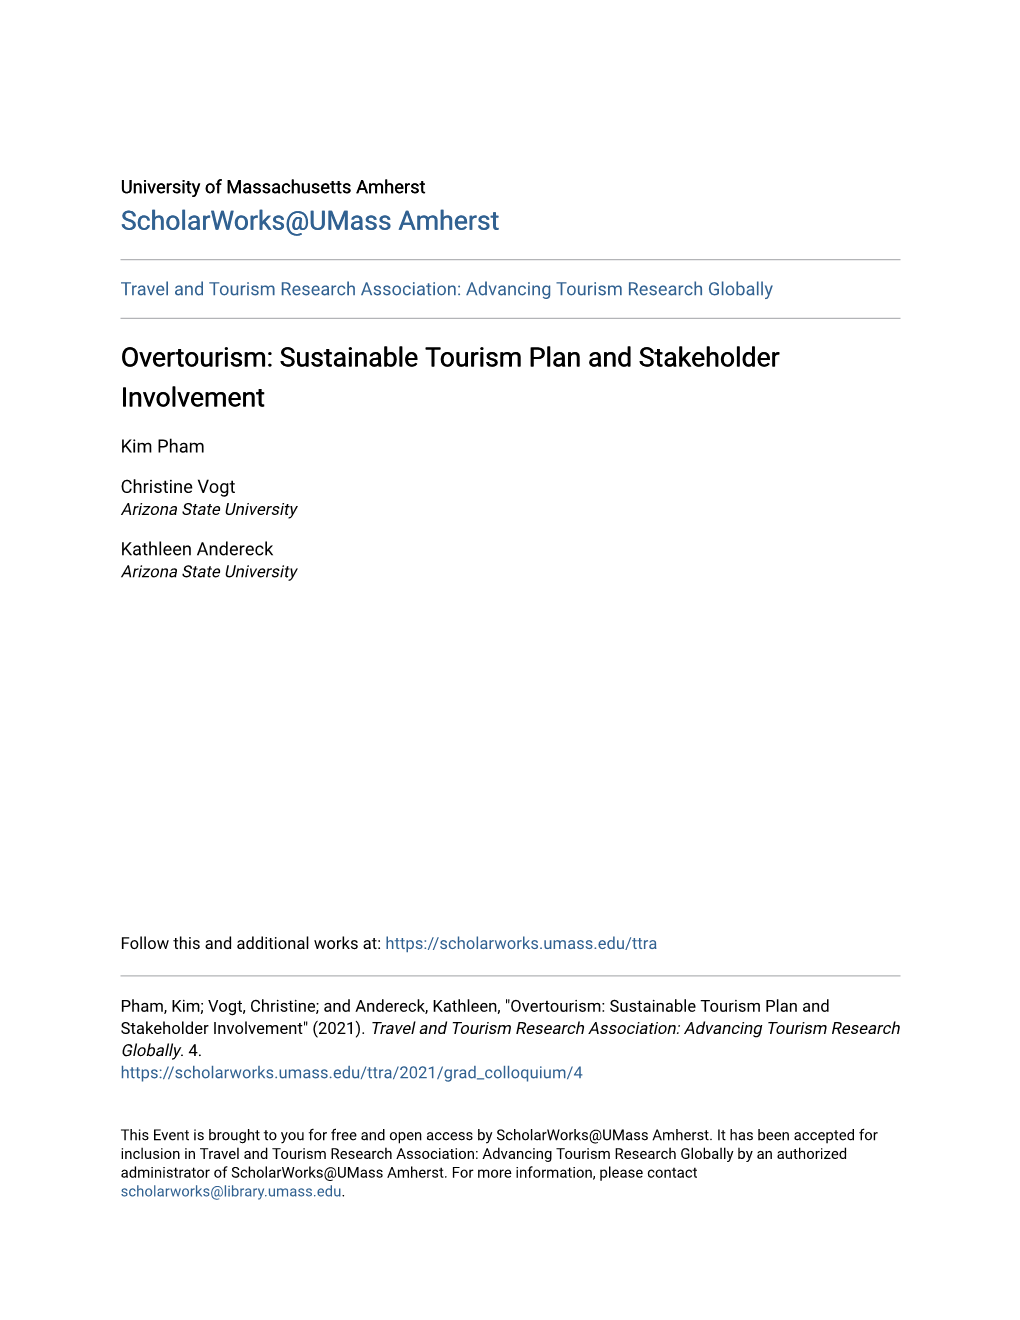 Overtourism: Sustainable Tourism Plan and Stakeholder Involvement